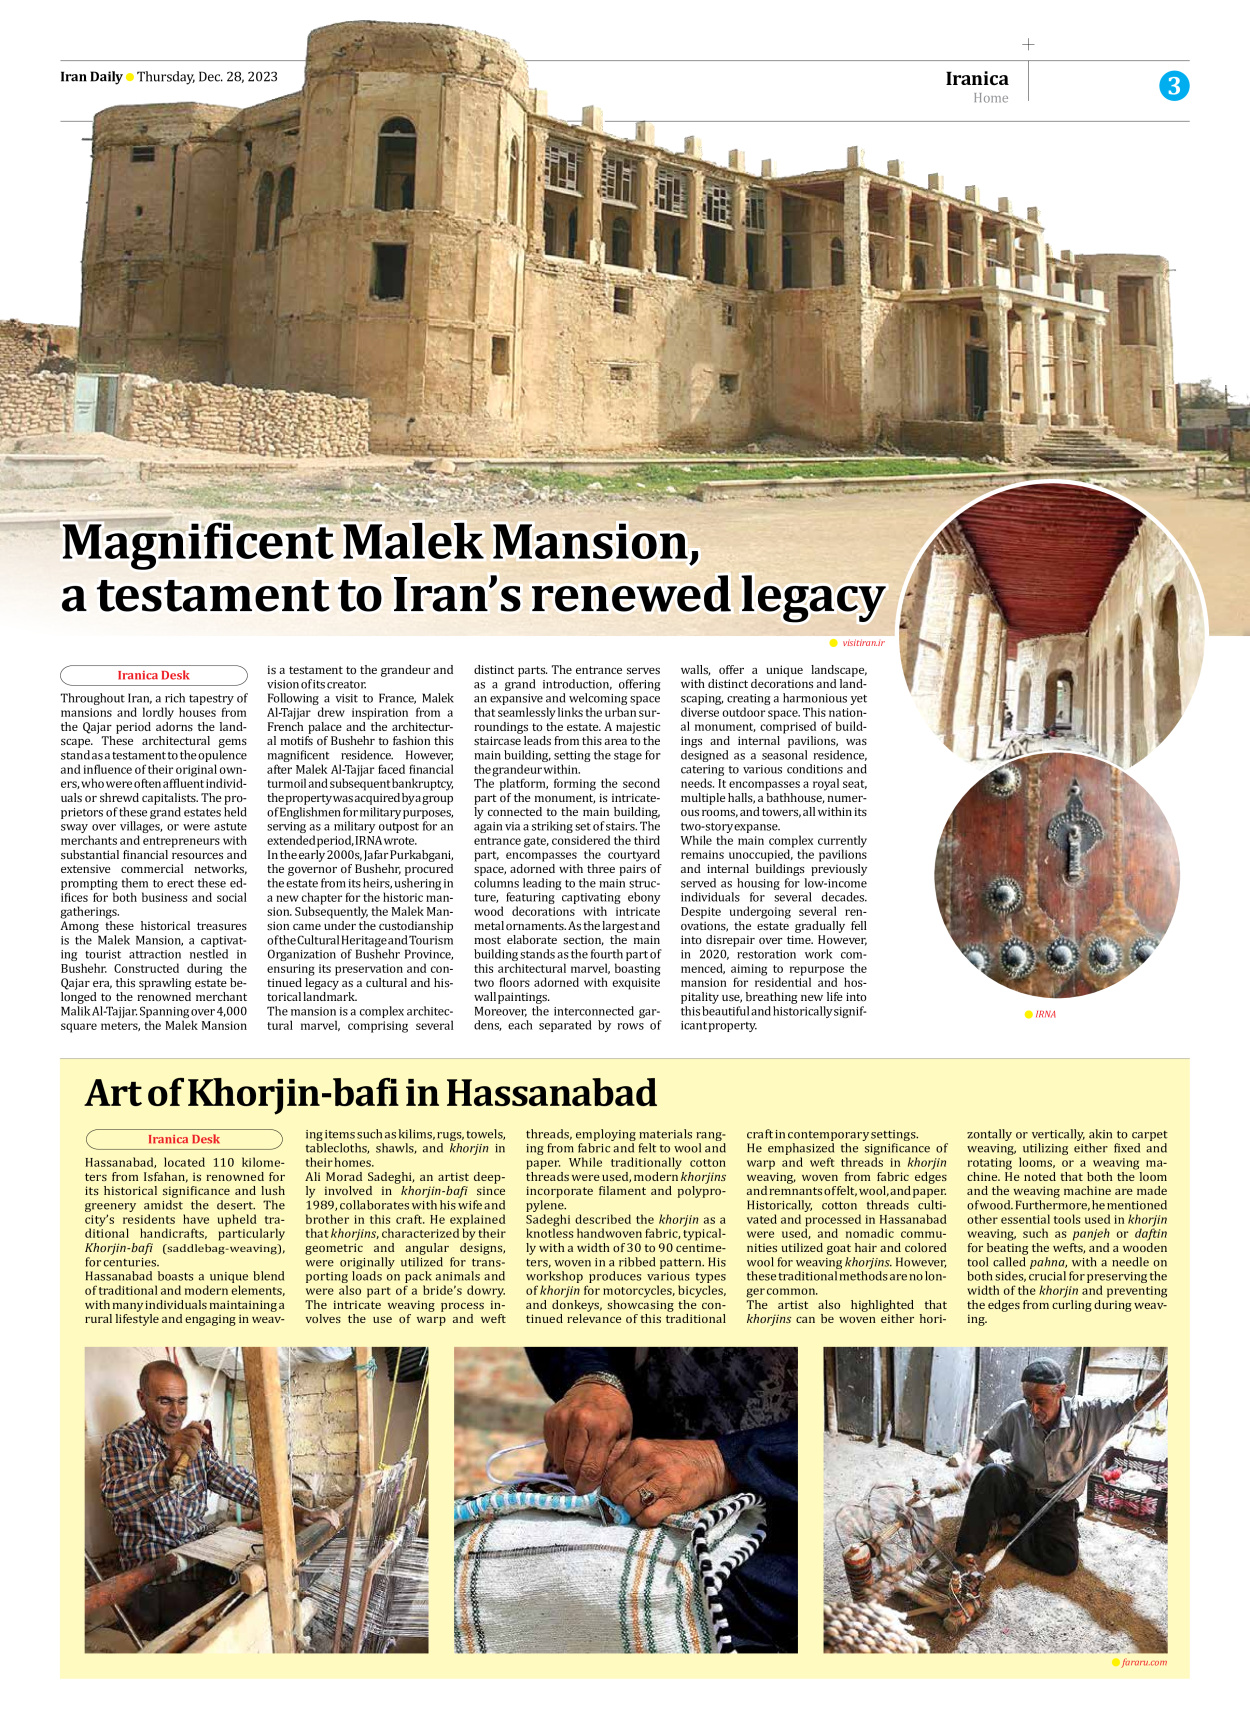 Iran Daily - Number Seven Thousand Four Hundred and Seventy - 28 December 2023 - Page 3